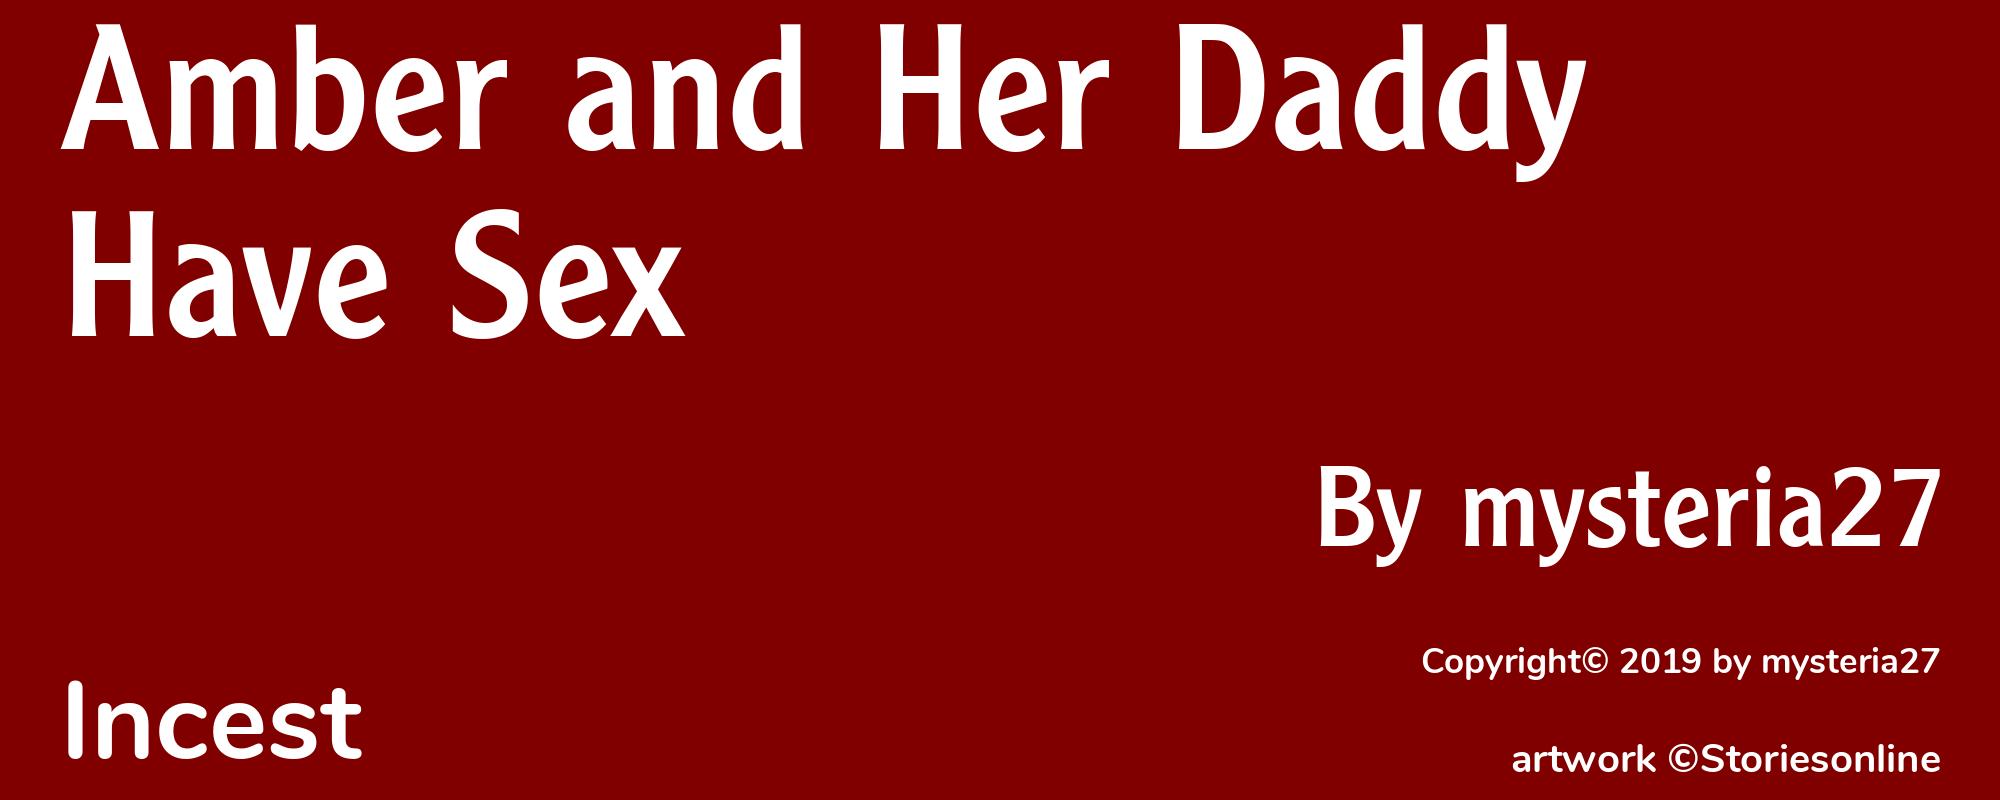 Amber and Her Daddy Have Sex - Cover